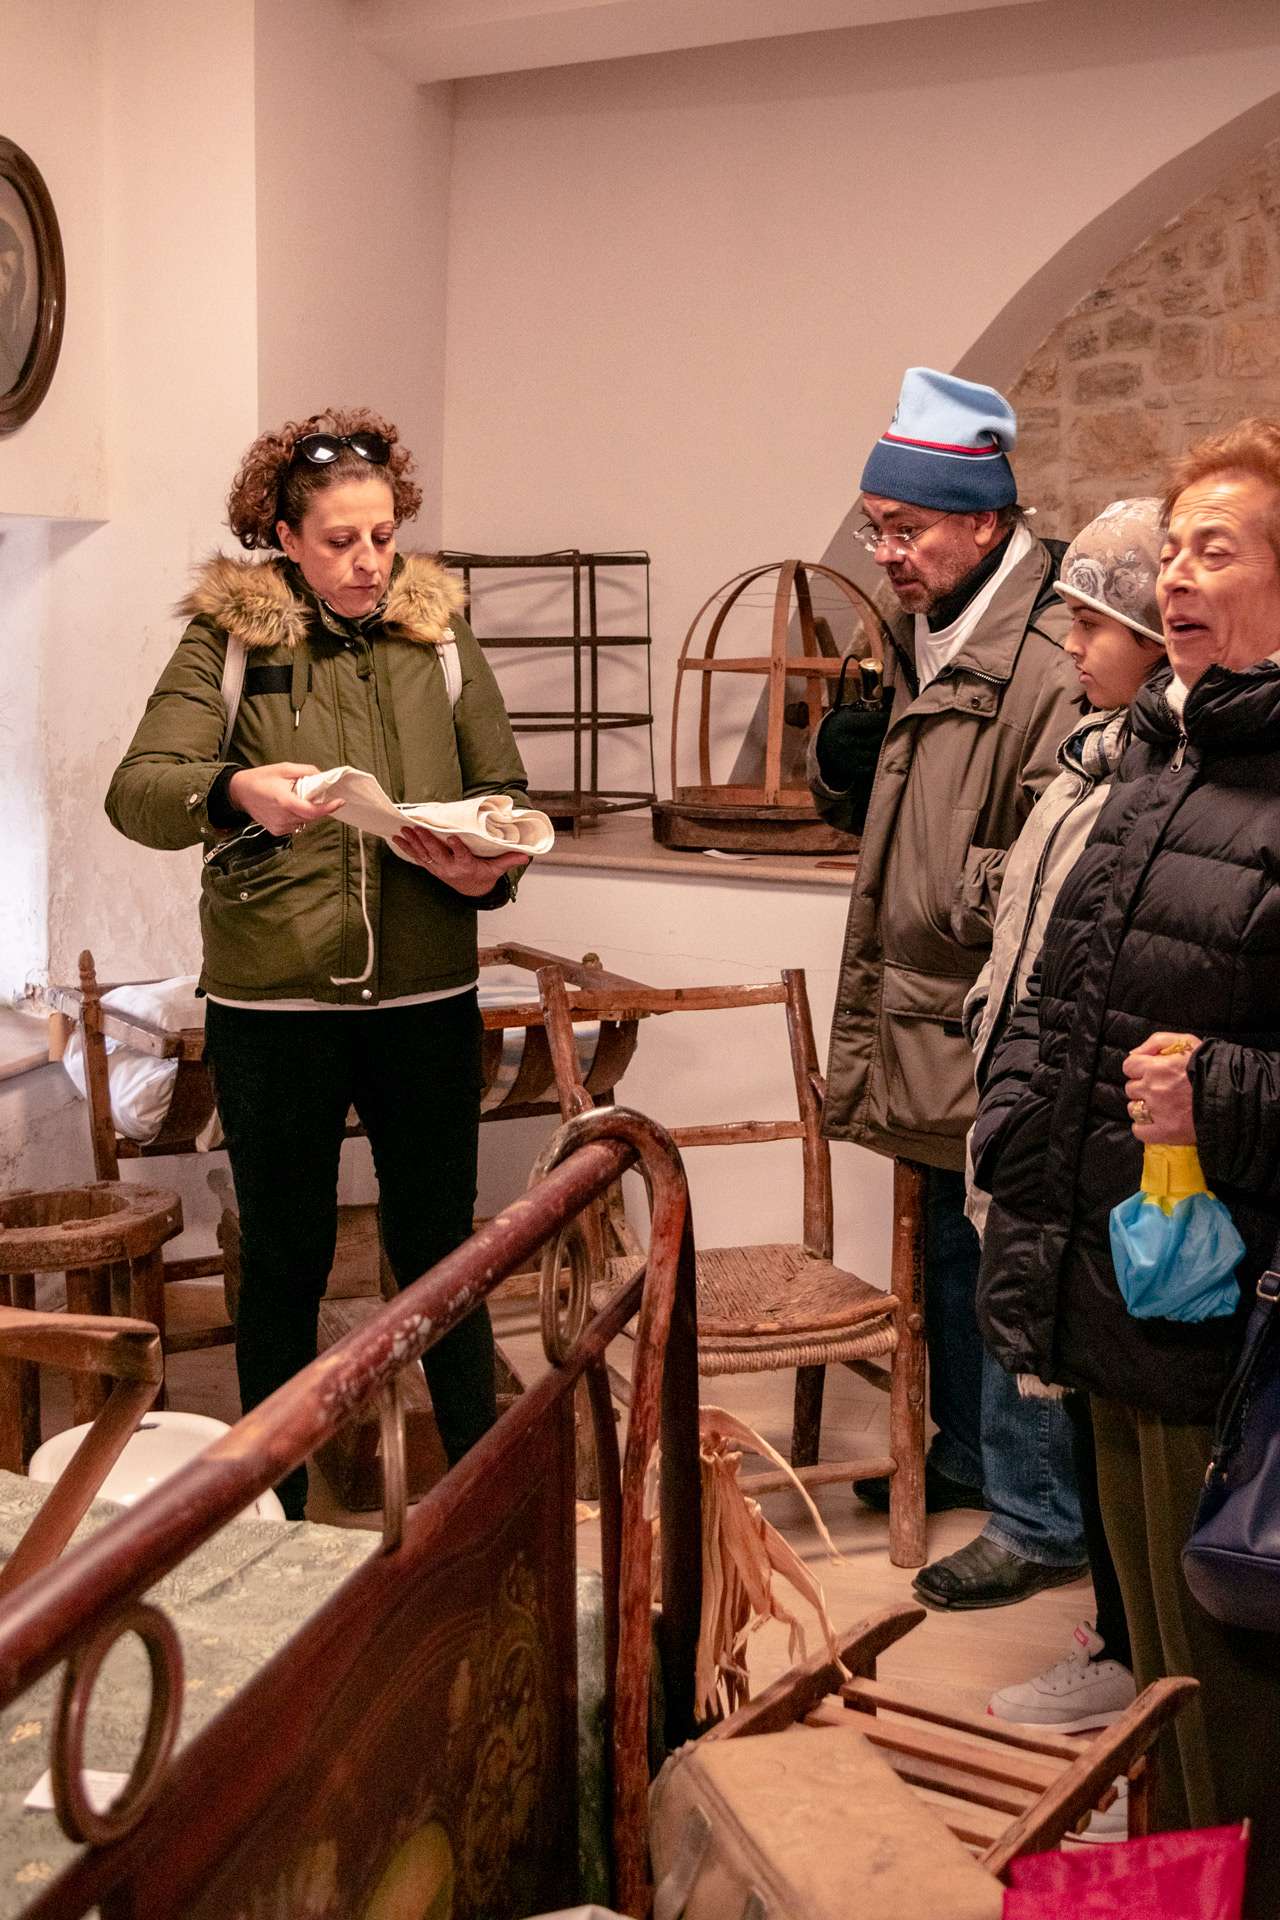 Disabled friendly guided tours with Puglia senza ostacoli at the museum.